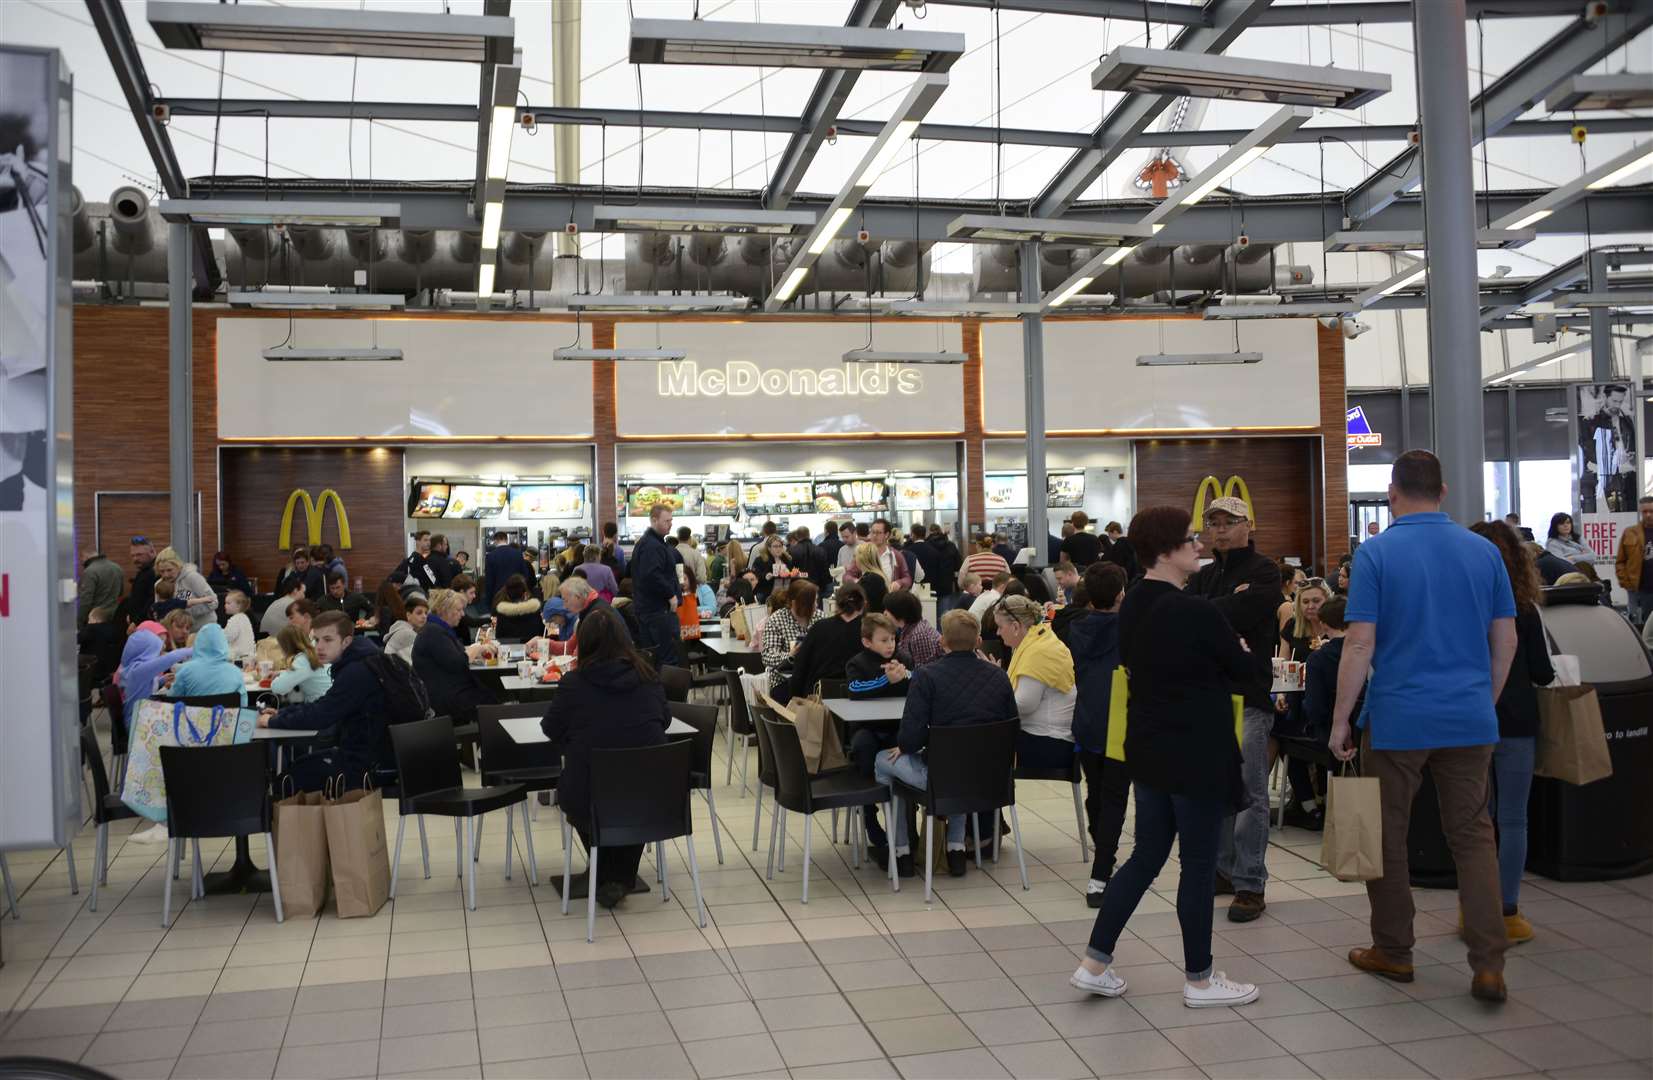 Ashford had previously been home to four McDonald’s but its Designer Outlet branch closed in January 2018 and did not return when the site’s £90m extension opened